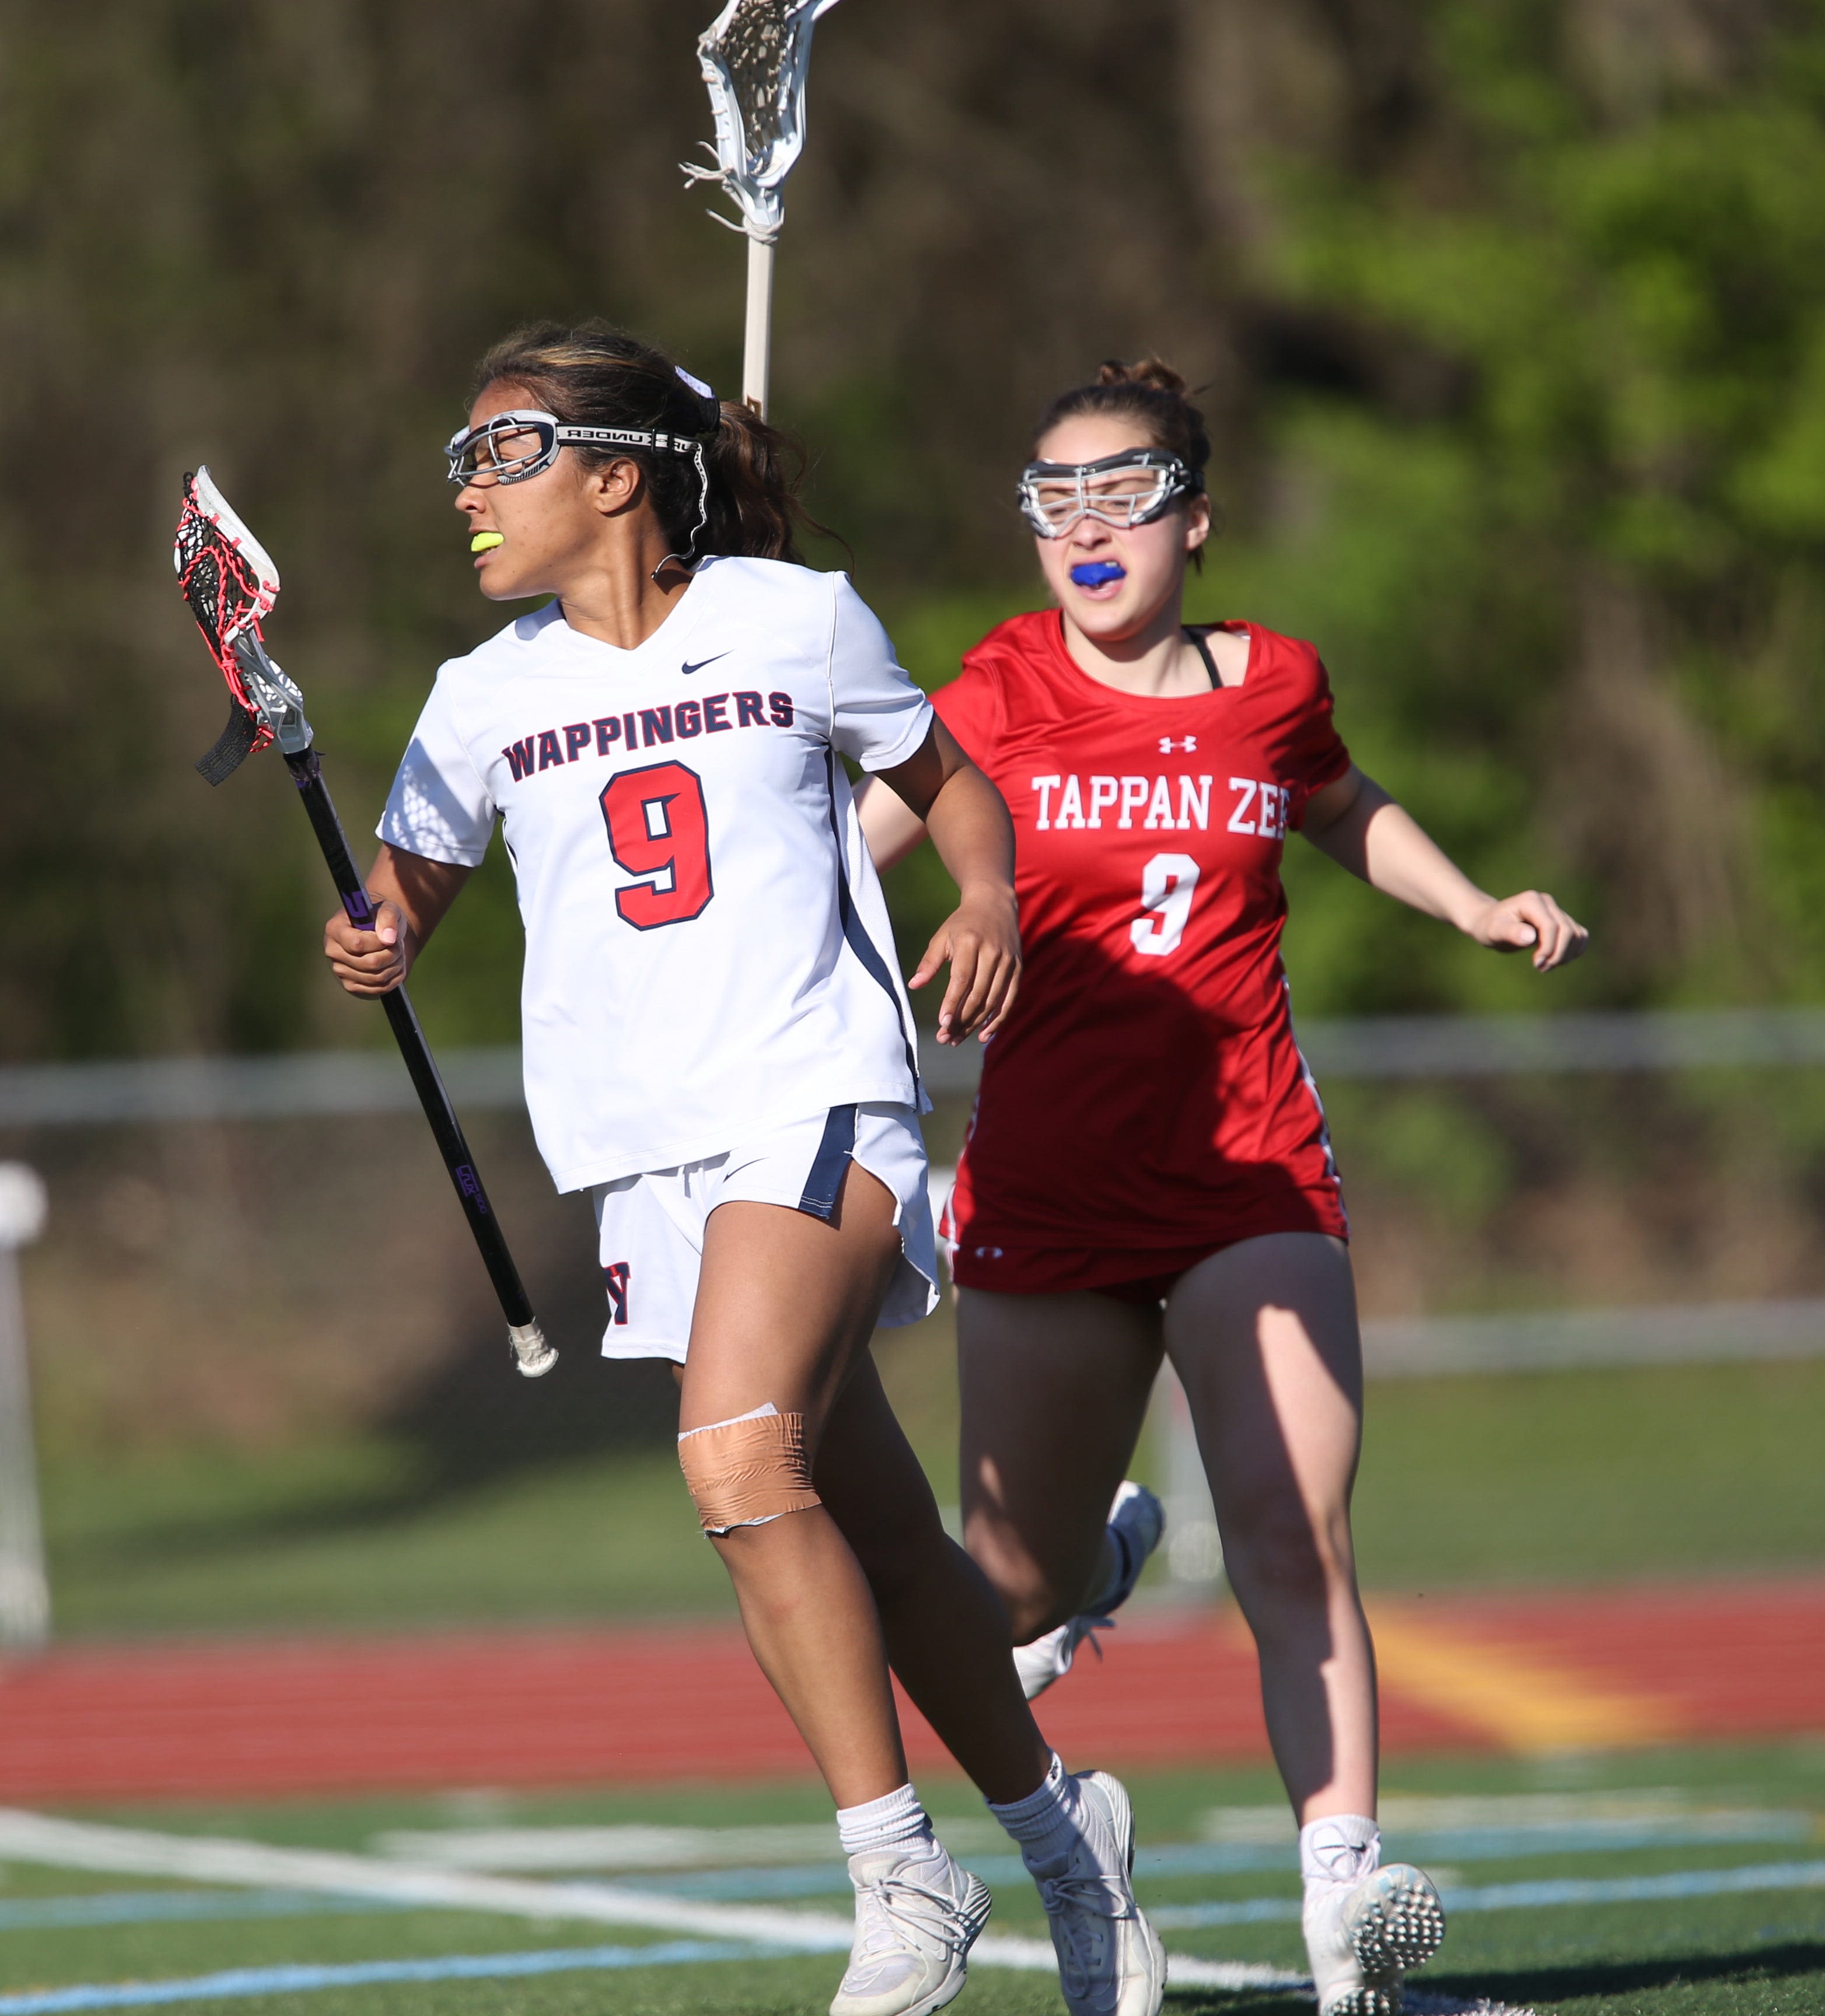 Girls lacrosse: Wappingers tops Brewster to clinch third consecutive league title